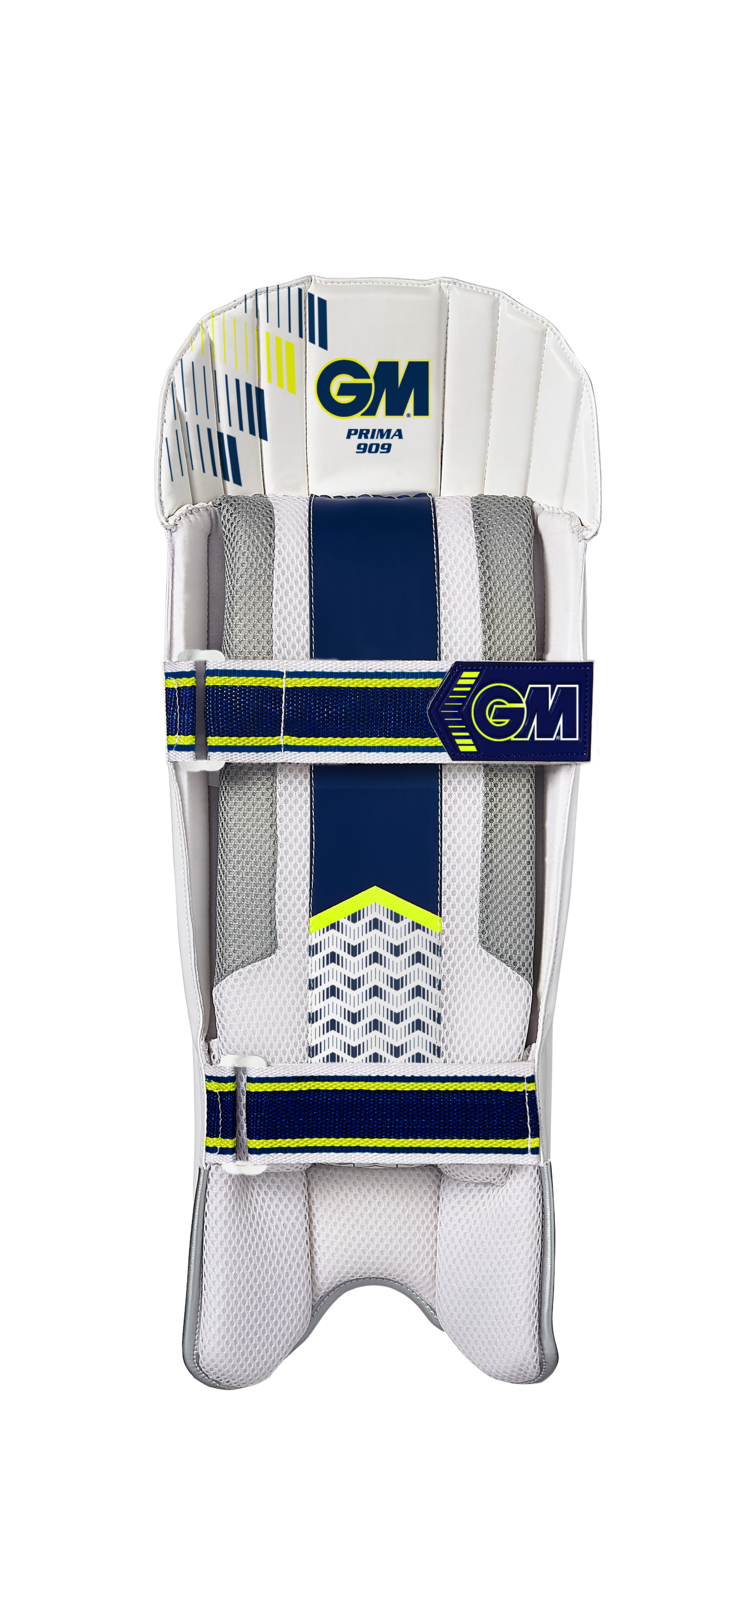 GM Prima 909 Wicket Keeping Pads